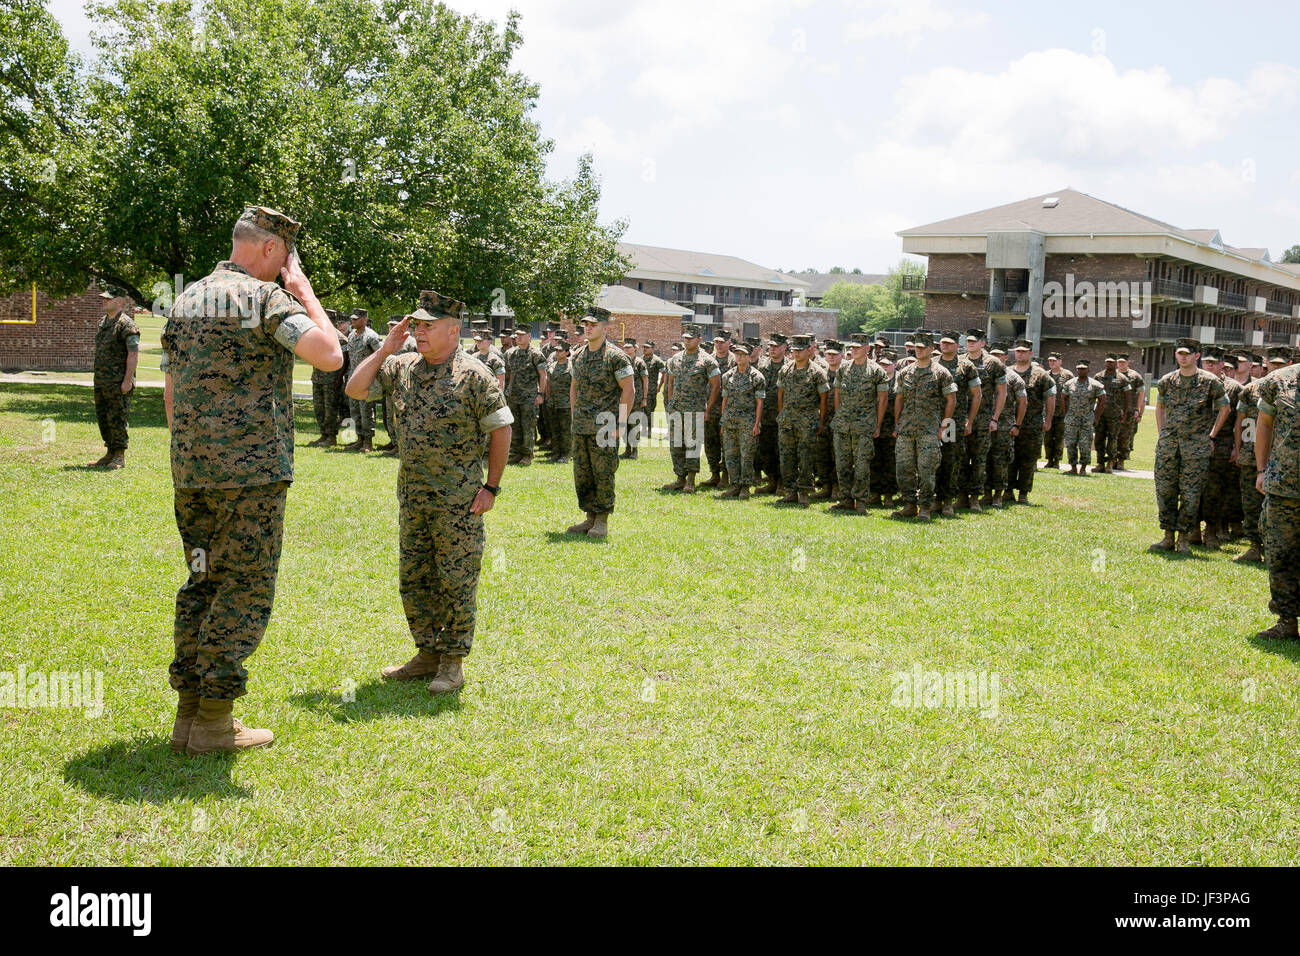 U.S. Marines and Sailors with 2nd Medical Battalion, II Marine Expeditionary Force (II MEF), stand in formation before receiving the “Lt. Gen. Chesty Puller” Outstanding Leadership Award on Camp Lejeune, N.C., May 10, 2017. The battalion earned this award for exceptional professional ability, superior performance and dedication to supporting the mission of the II MEF. (U.S. Marine Corps photo by Sgt. Kelly L. Street) Stock Photo